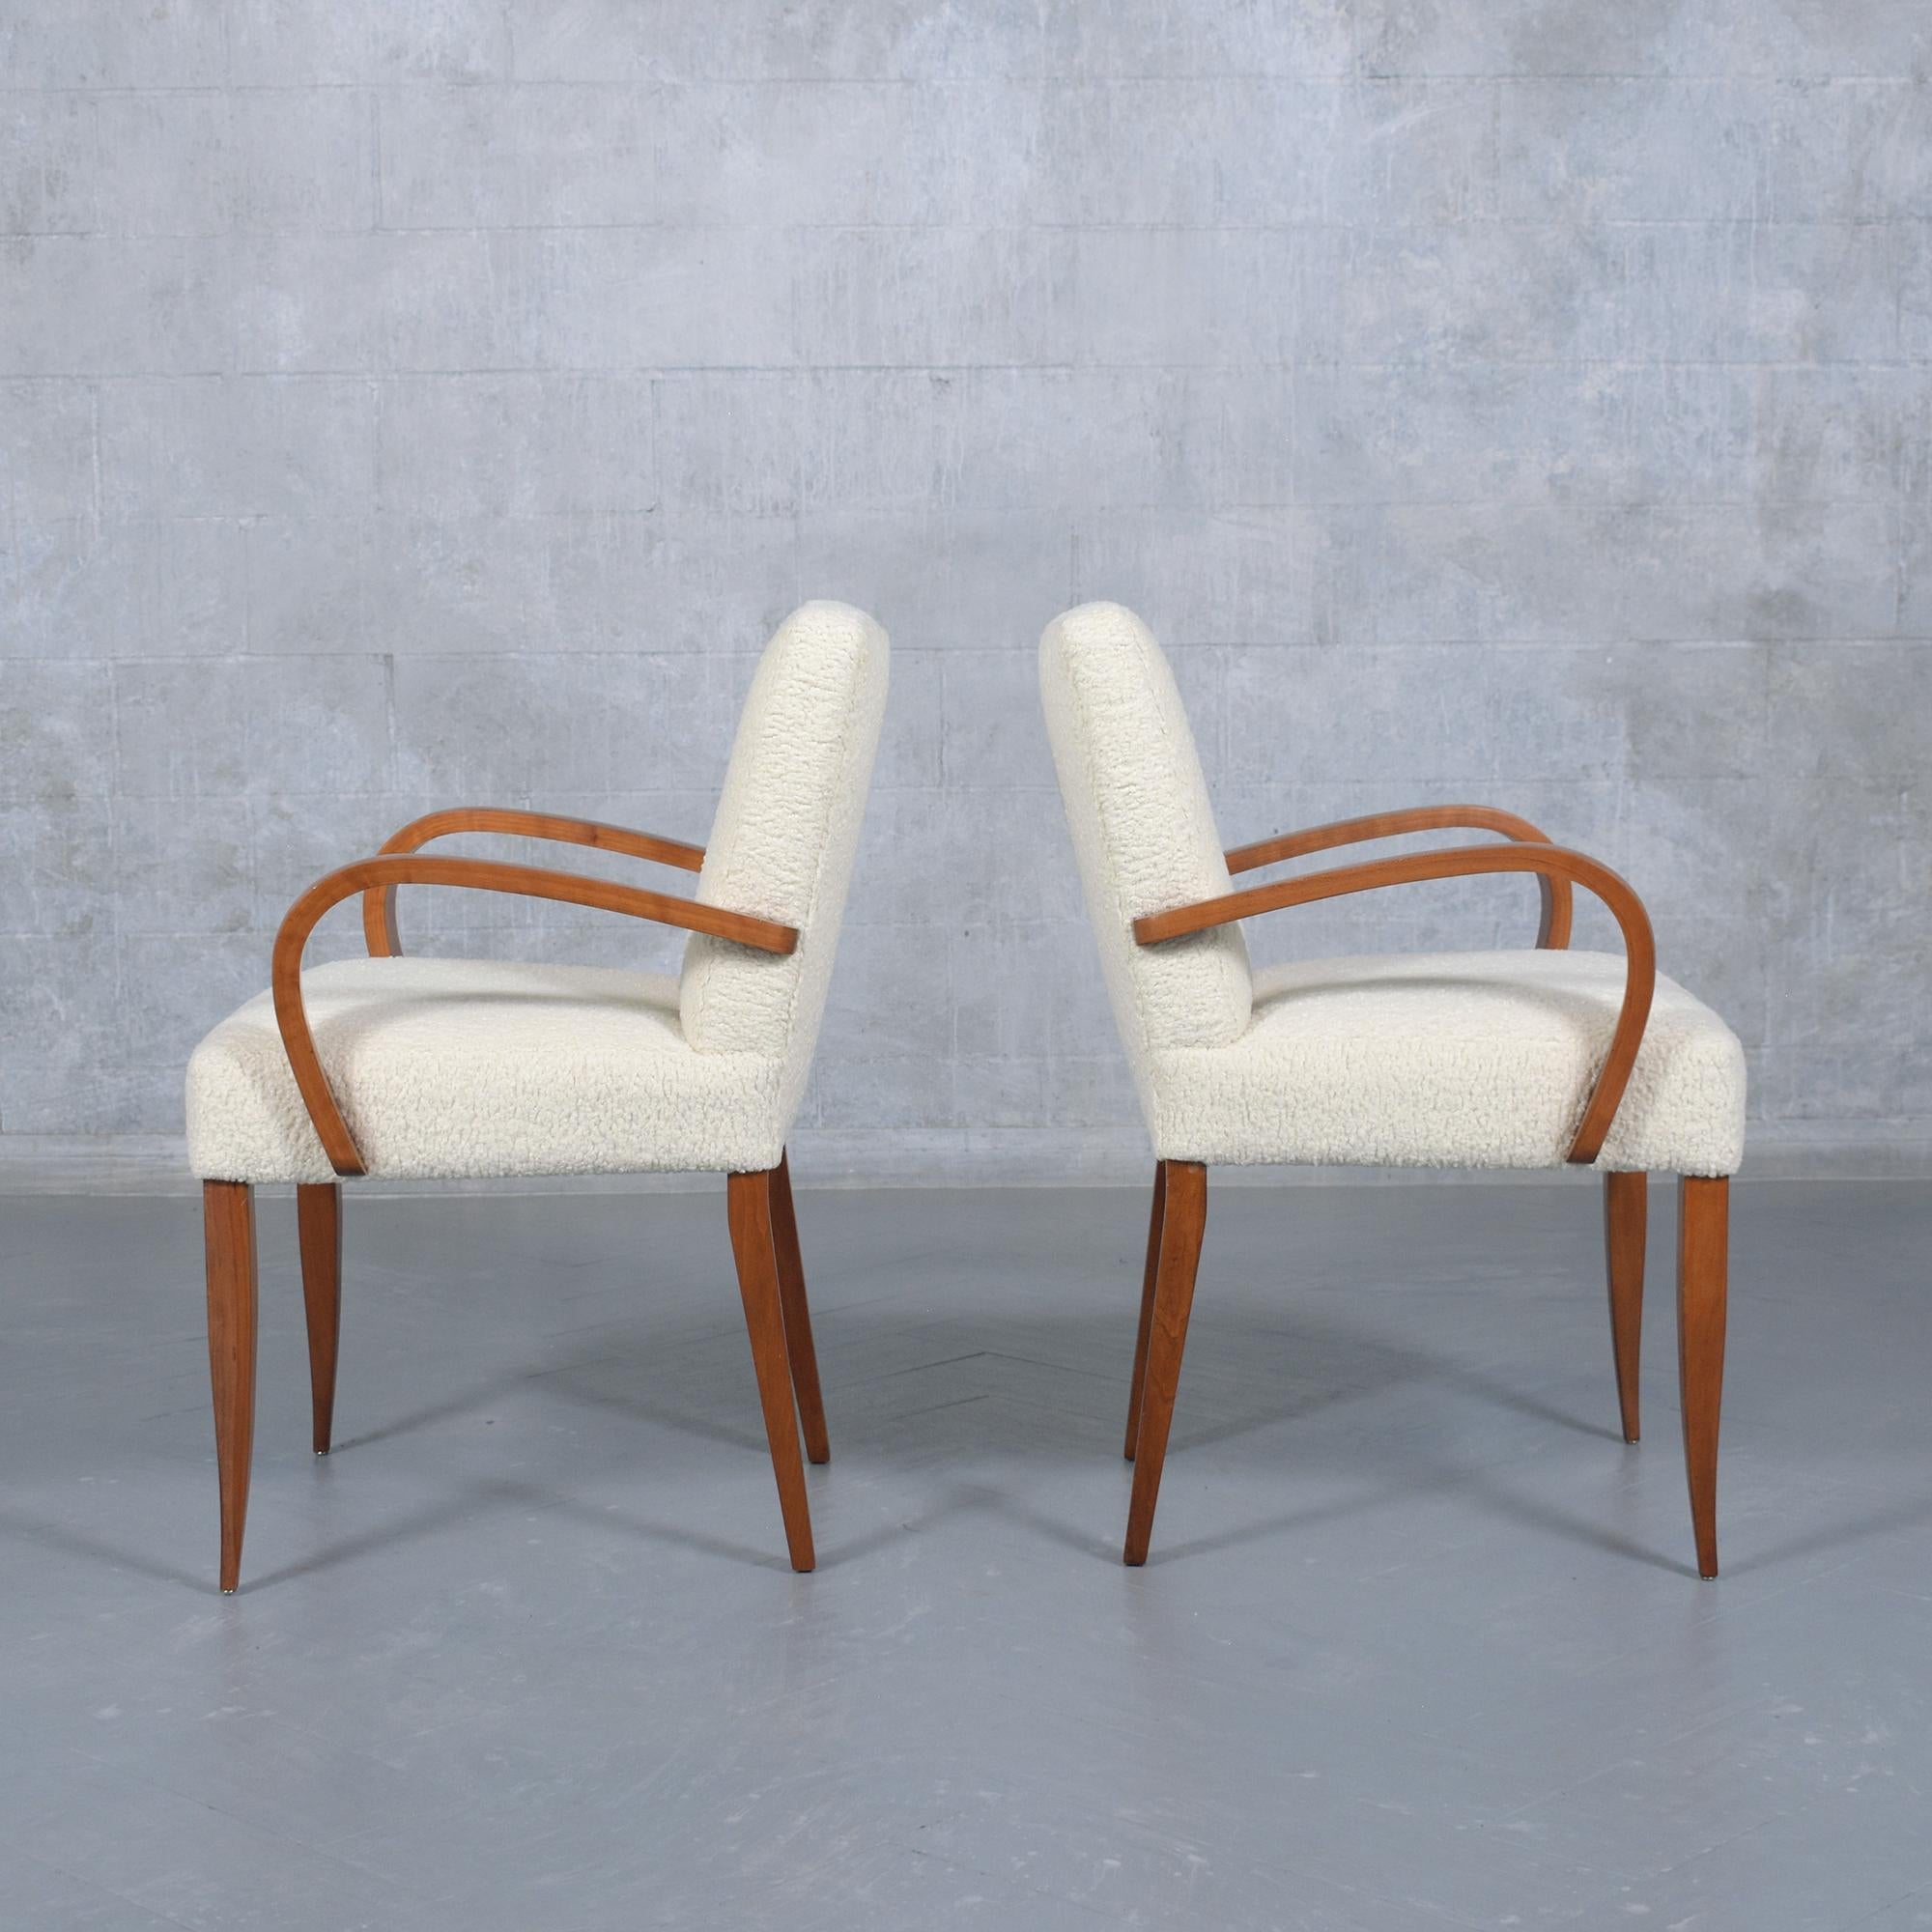 Pair of Mid-Century Modern Walnut Armchairs: Refined Elegance & Comfort For Sale 1